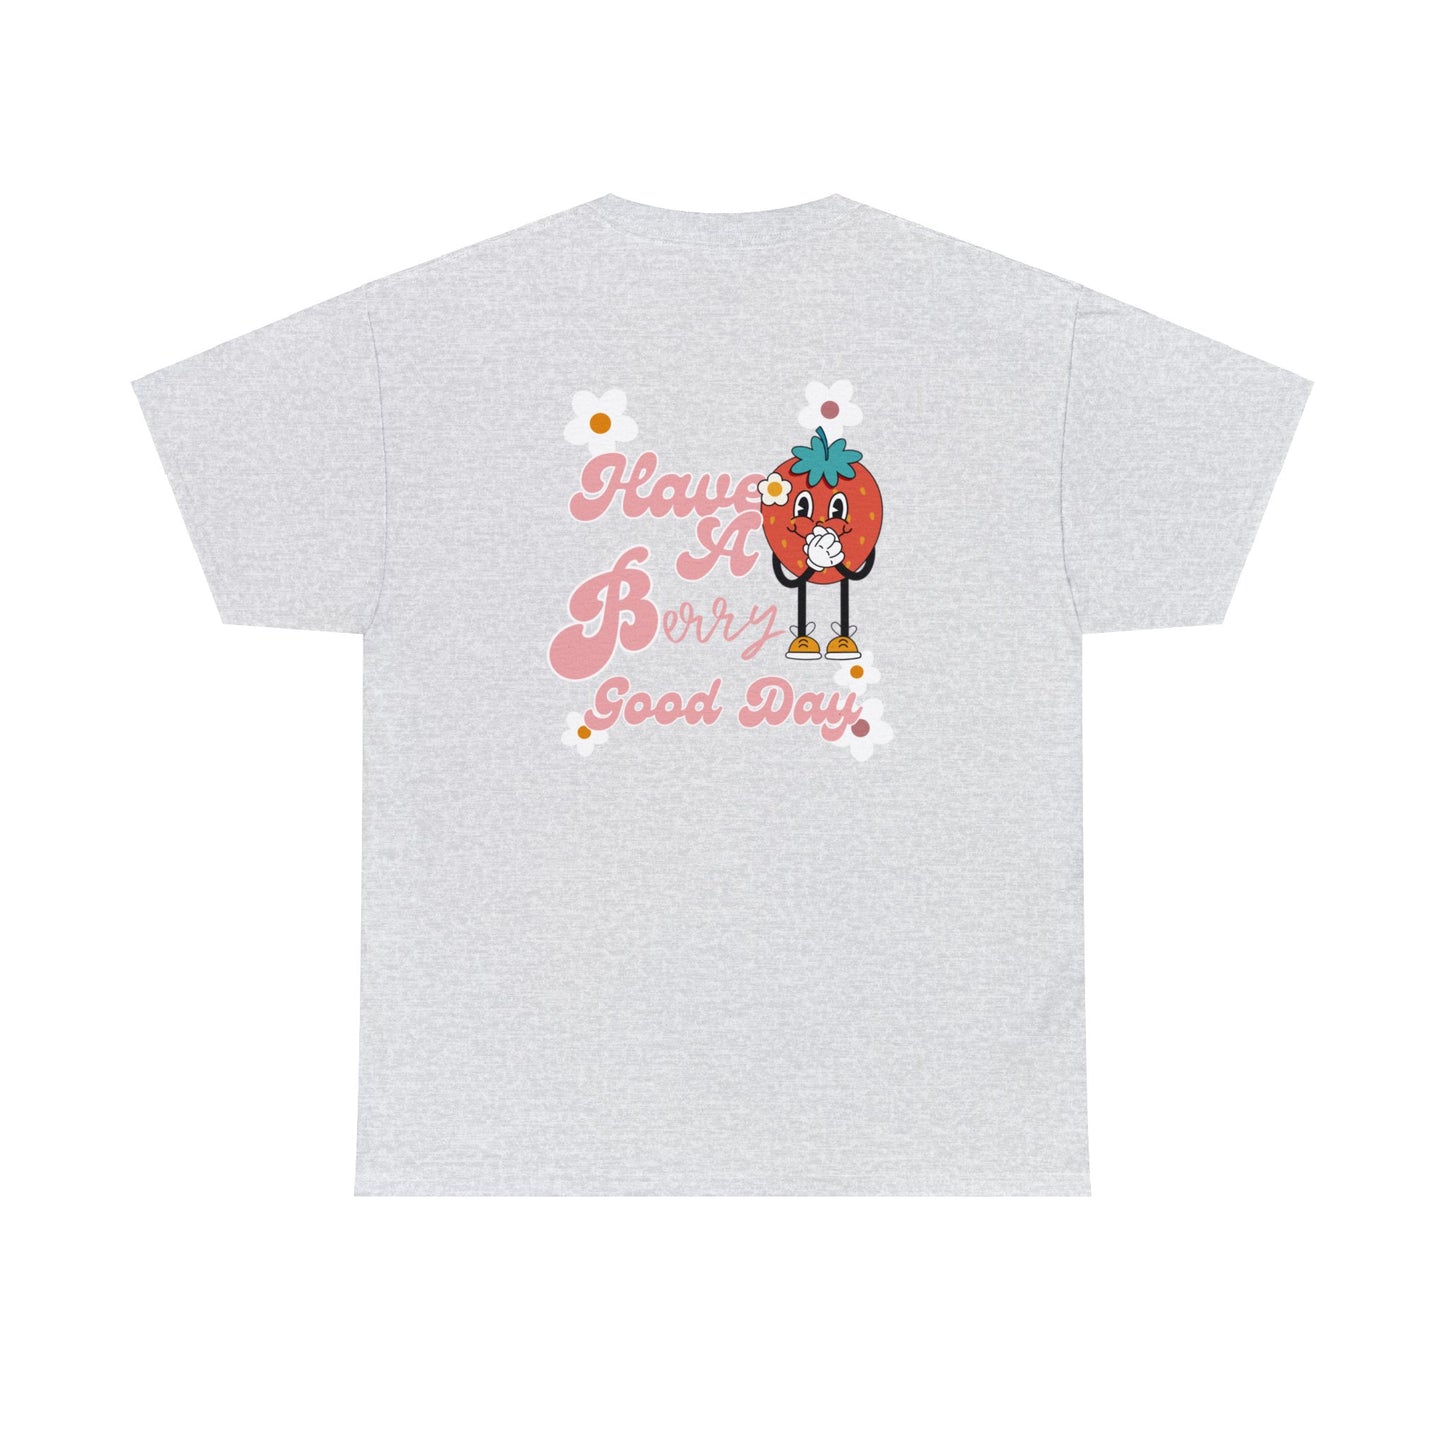 Vintage BERRY GOOD DAY t-shirt - adult